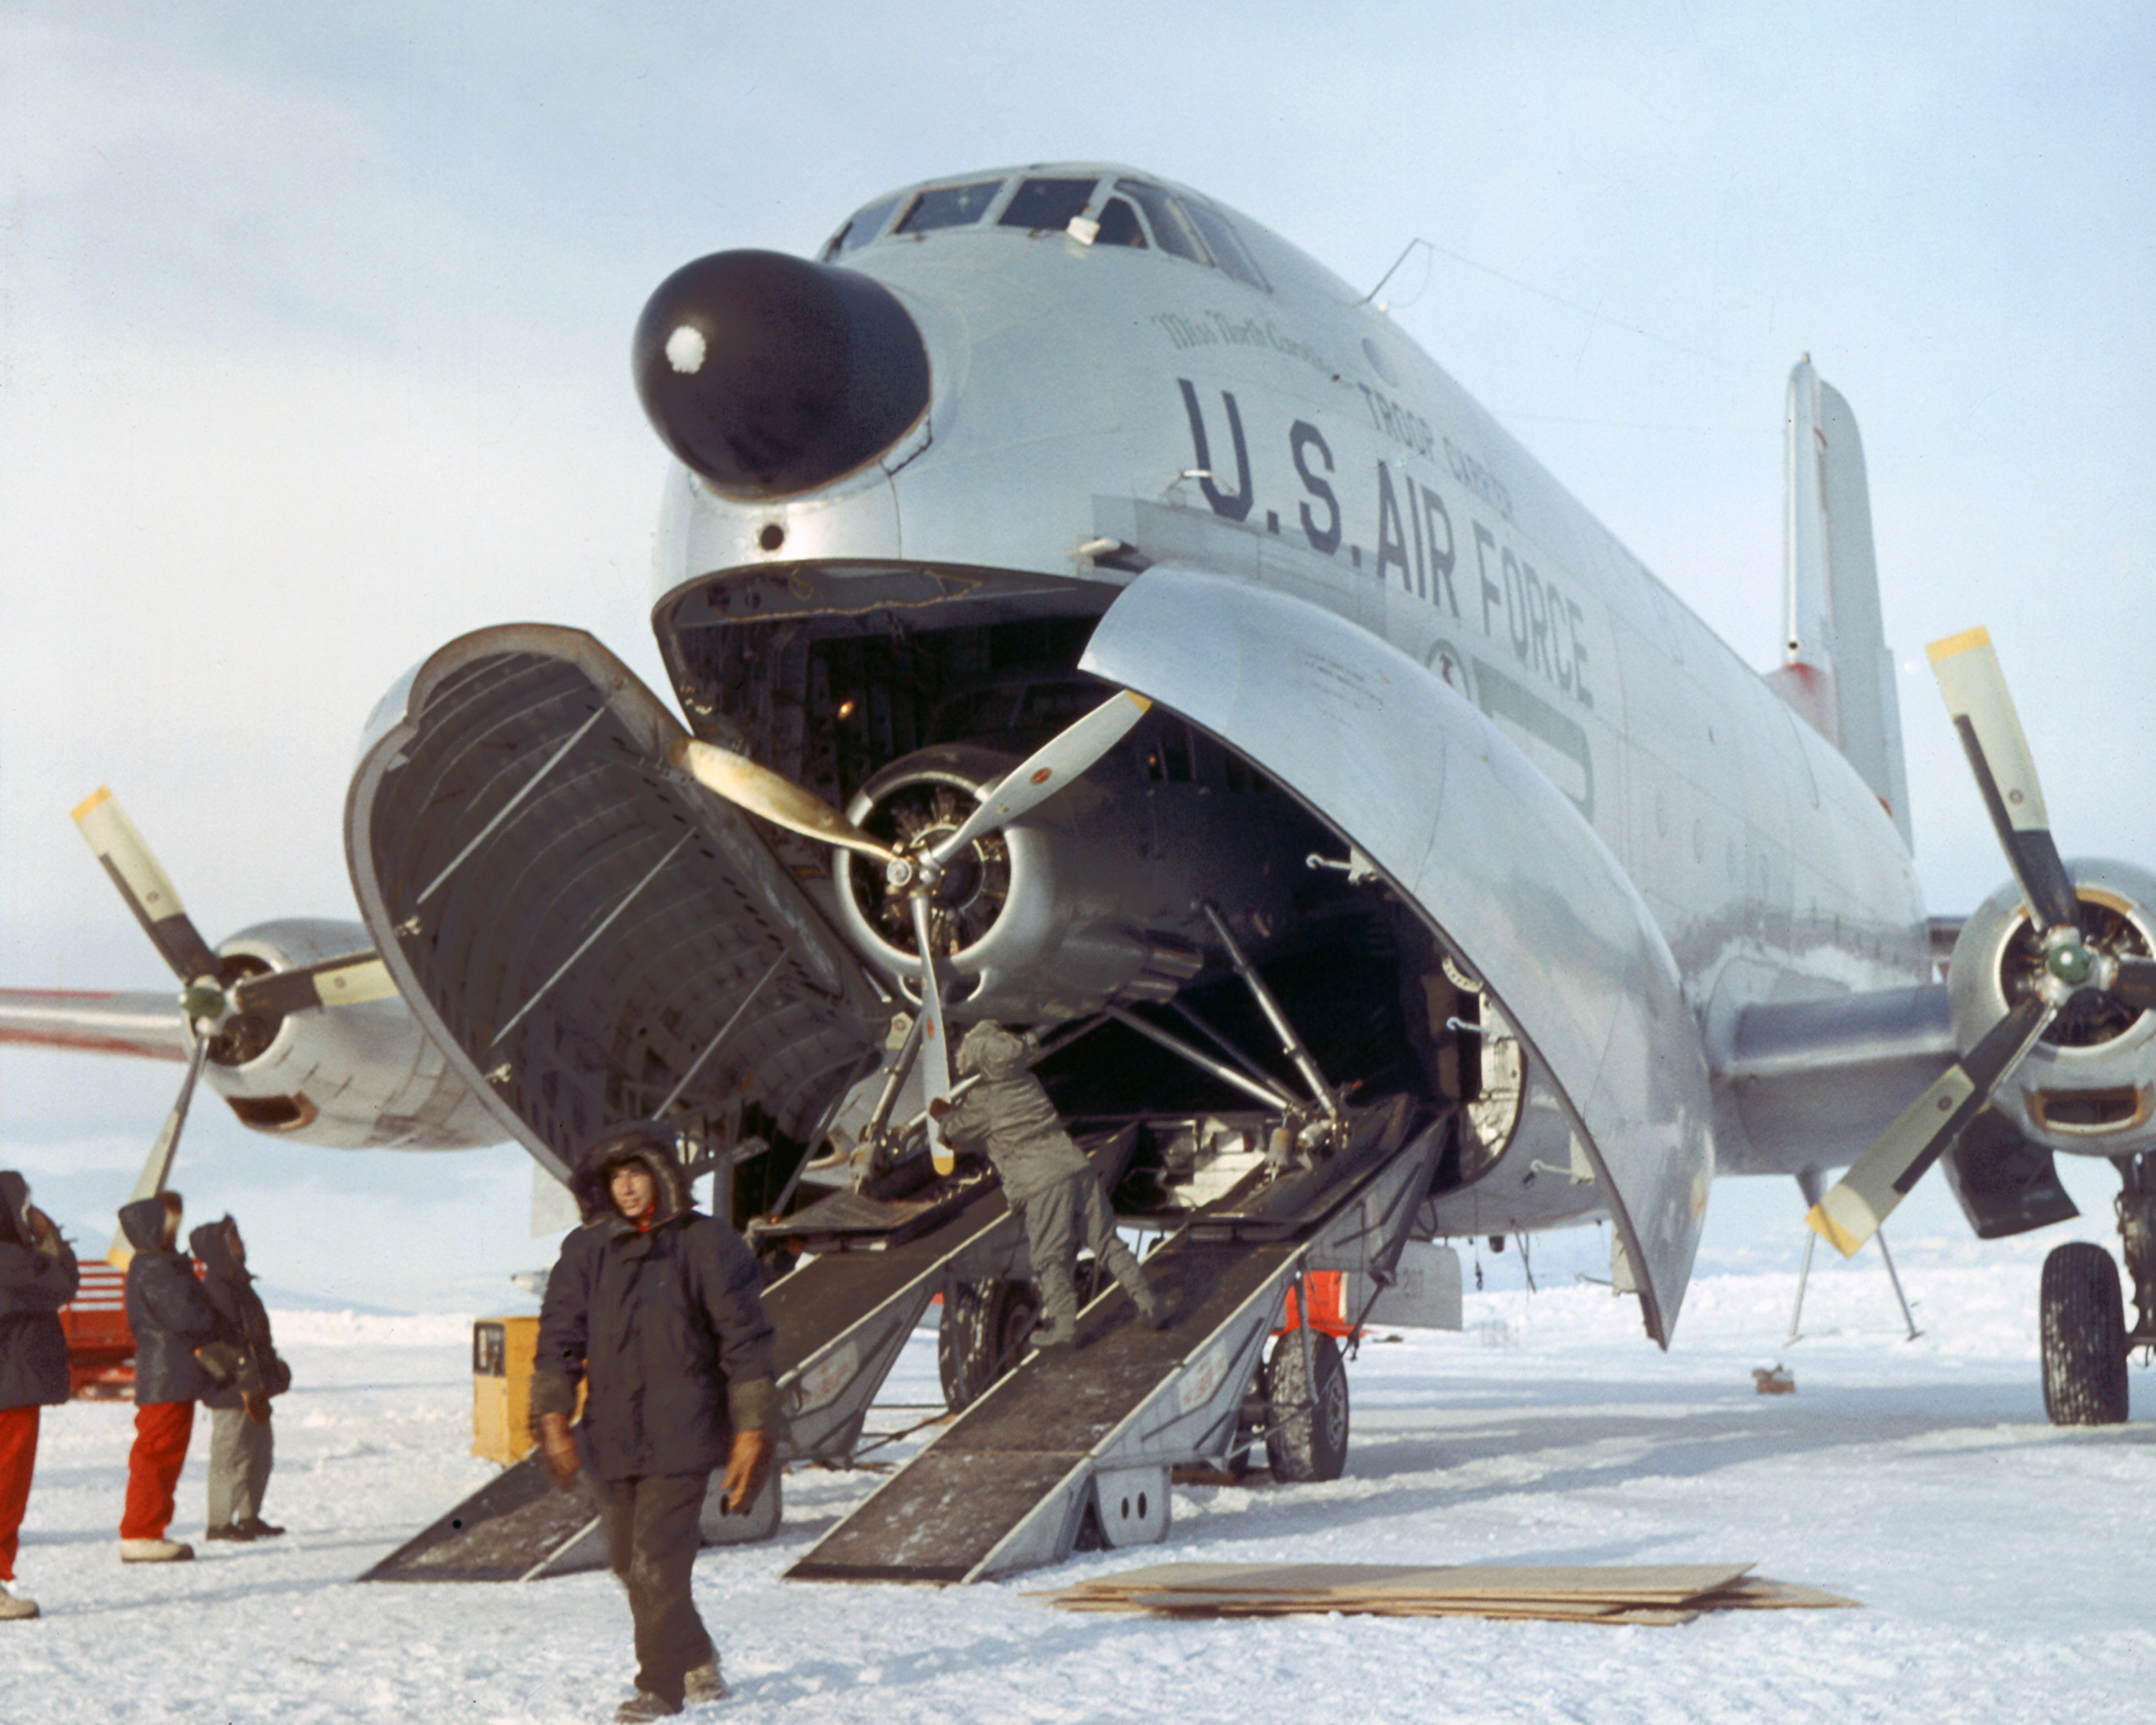 A U.S. Air Force C-124 Globemaster delivers an airplane to McMurdo Station, Antarctica, in 1956